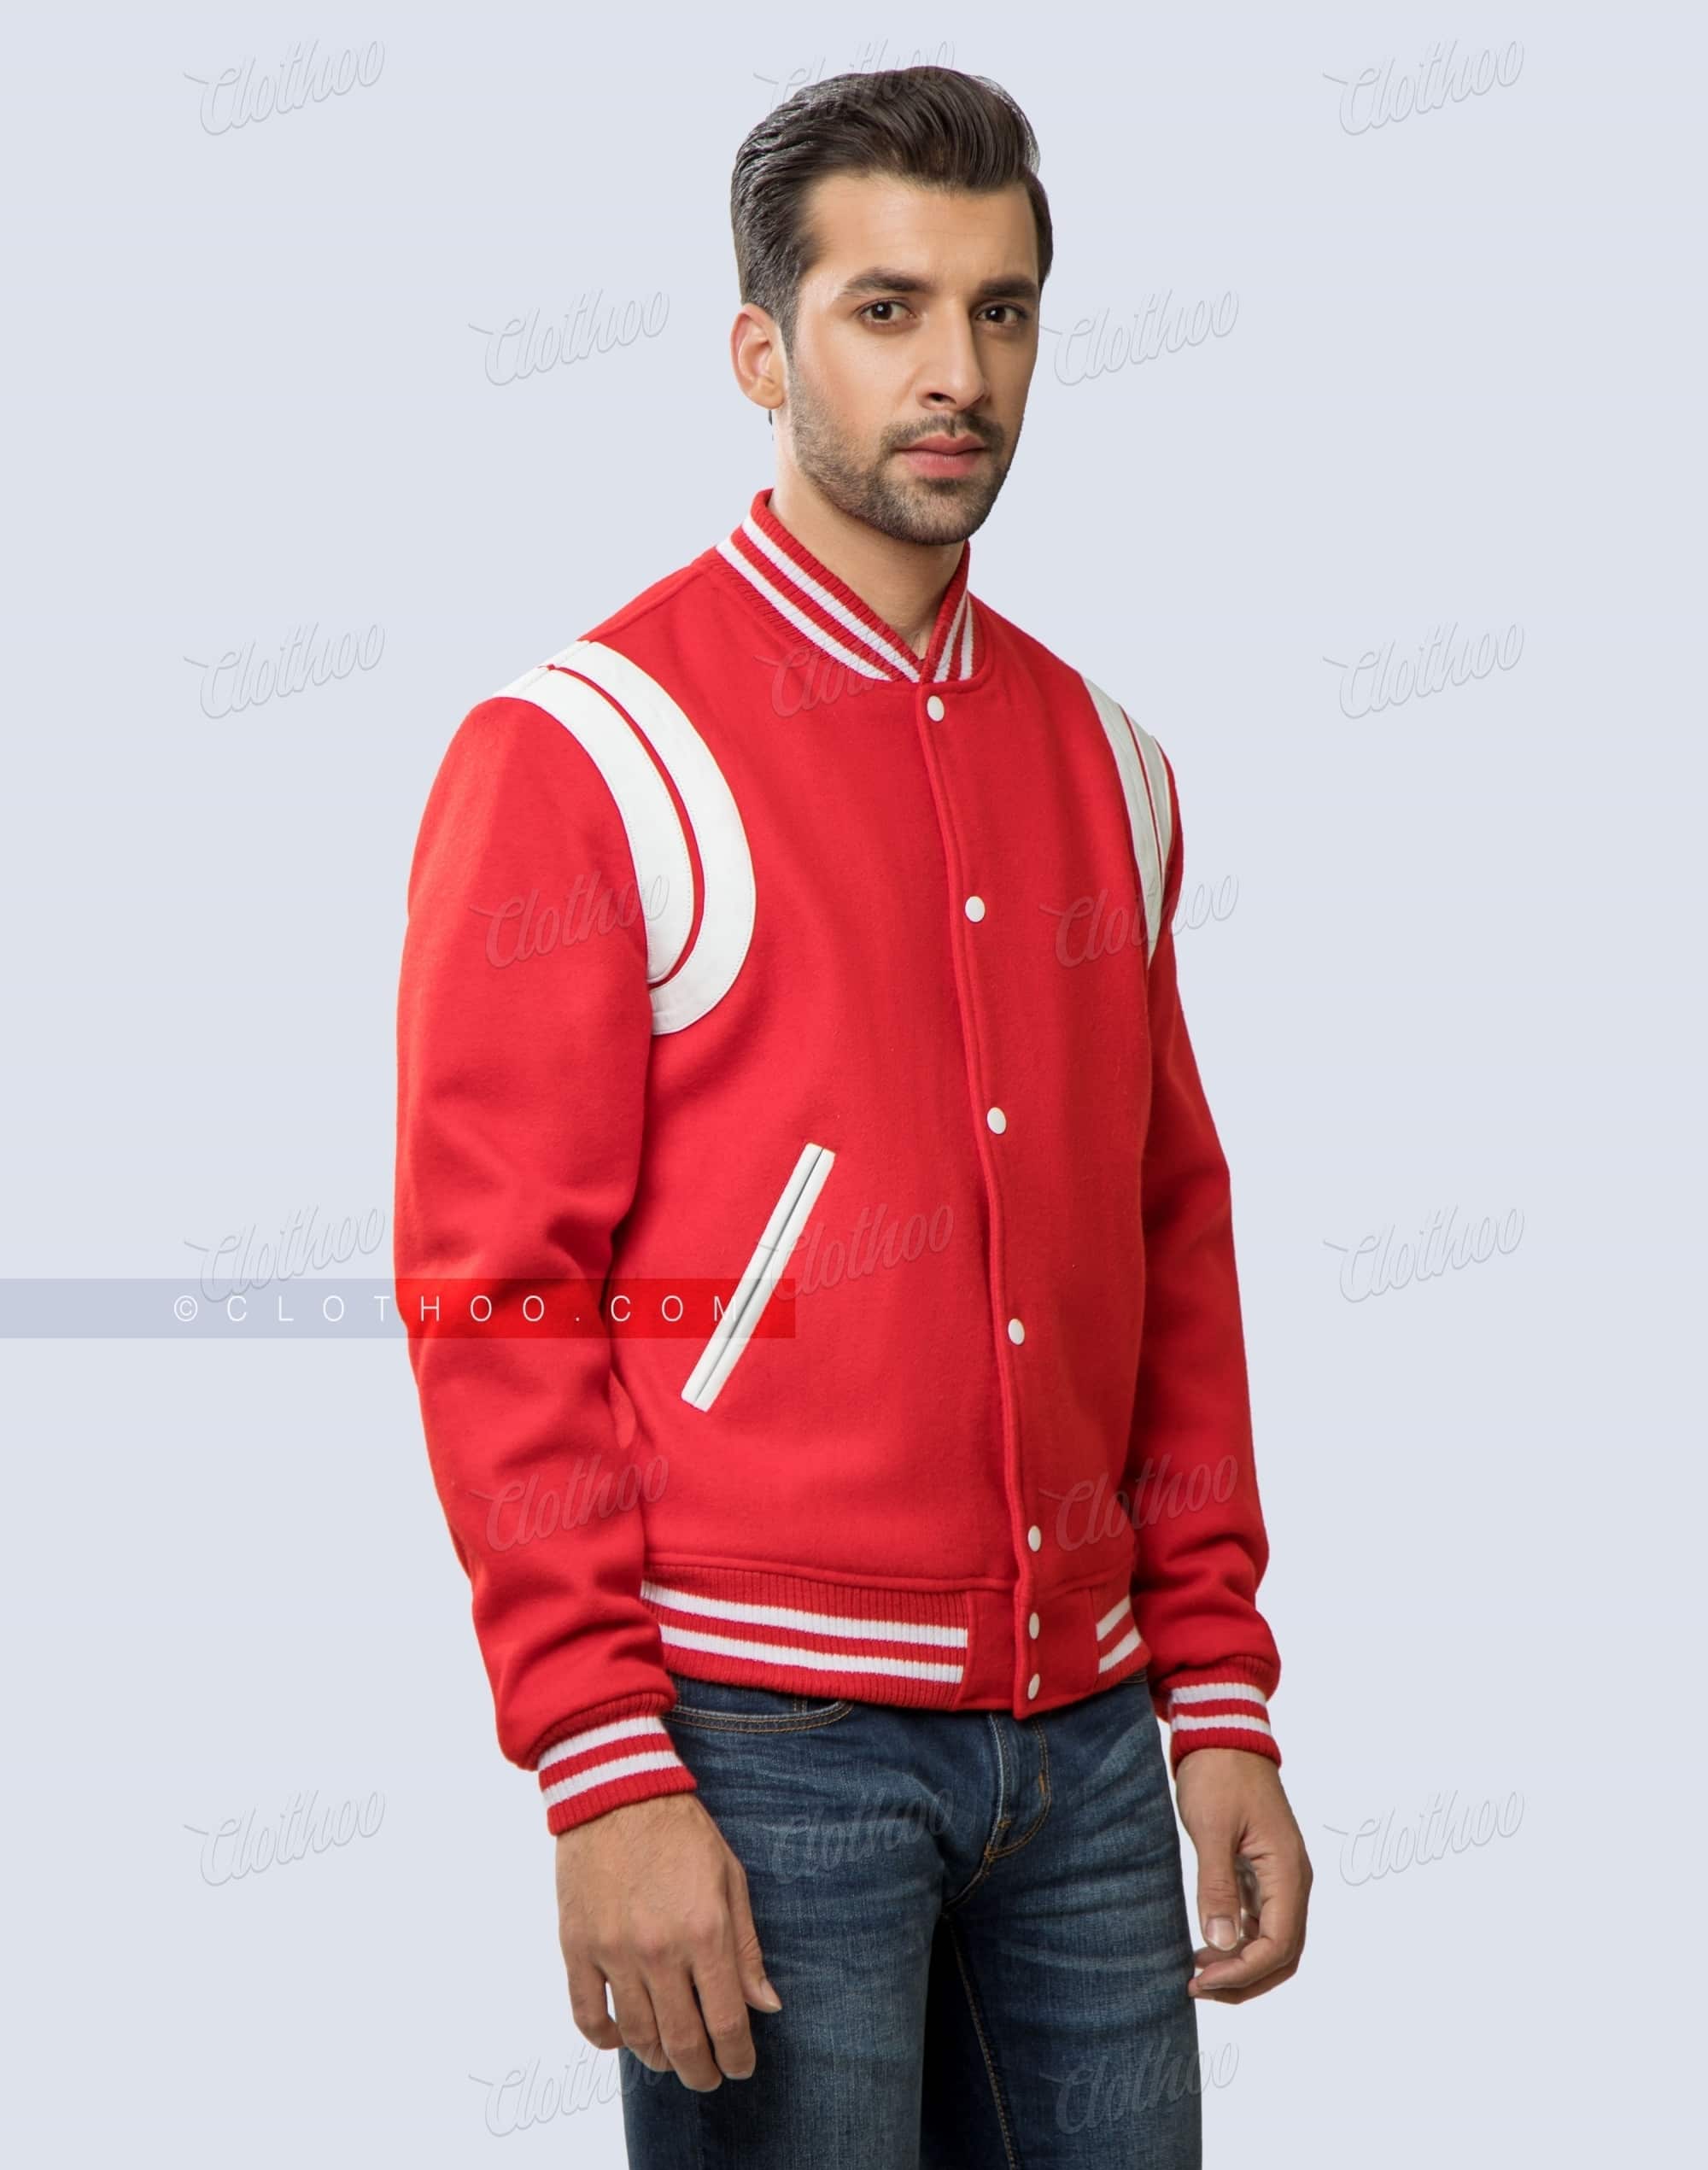 Stylish Varsity Jacket in Red with Shoulder Inserts | Clothoo